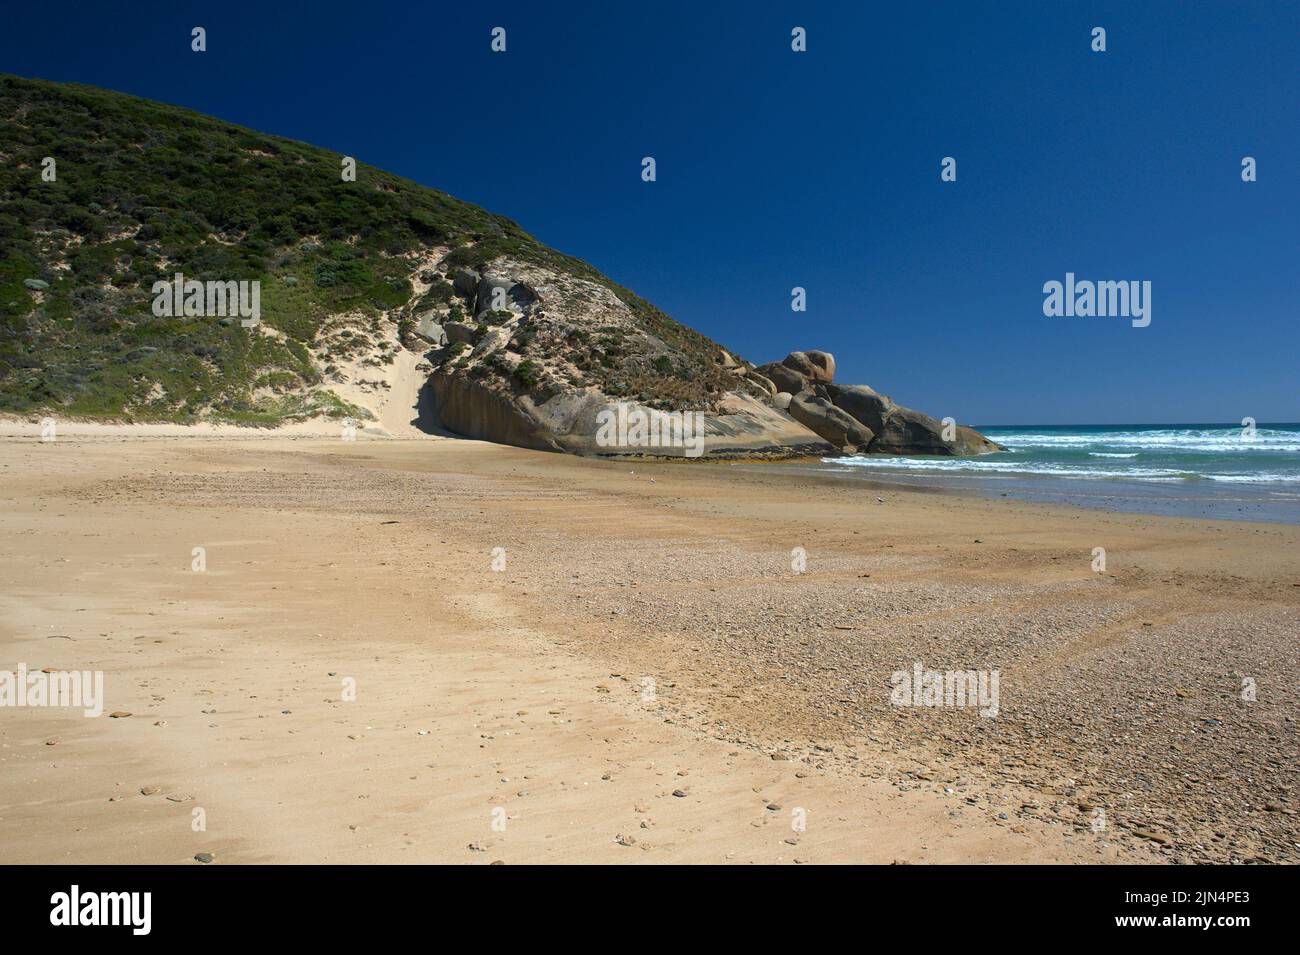 Tongue Point is a popular holiday spot on the Western side of Wilsons Promontory National Park in Victoria, Australia. Not usually this deserted! Stock Photo